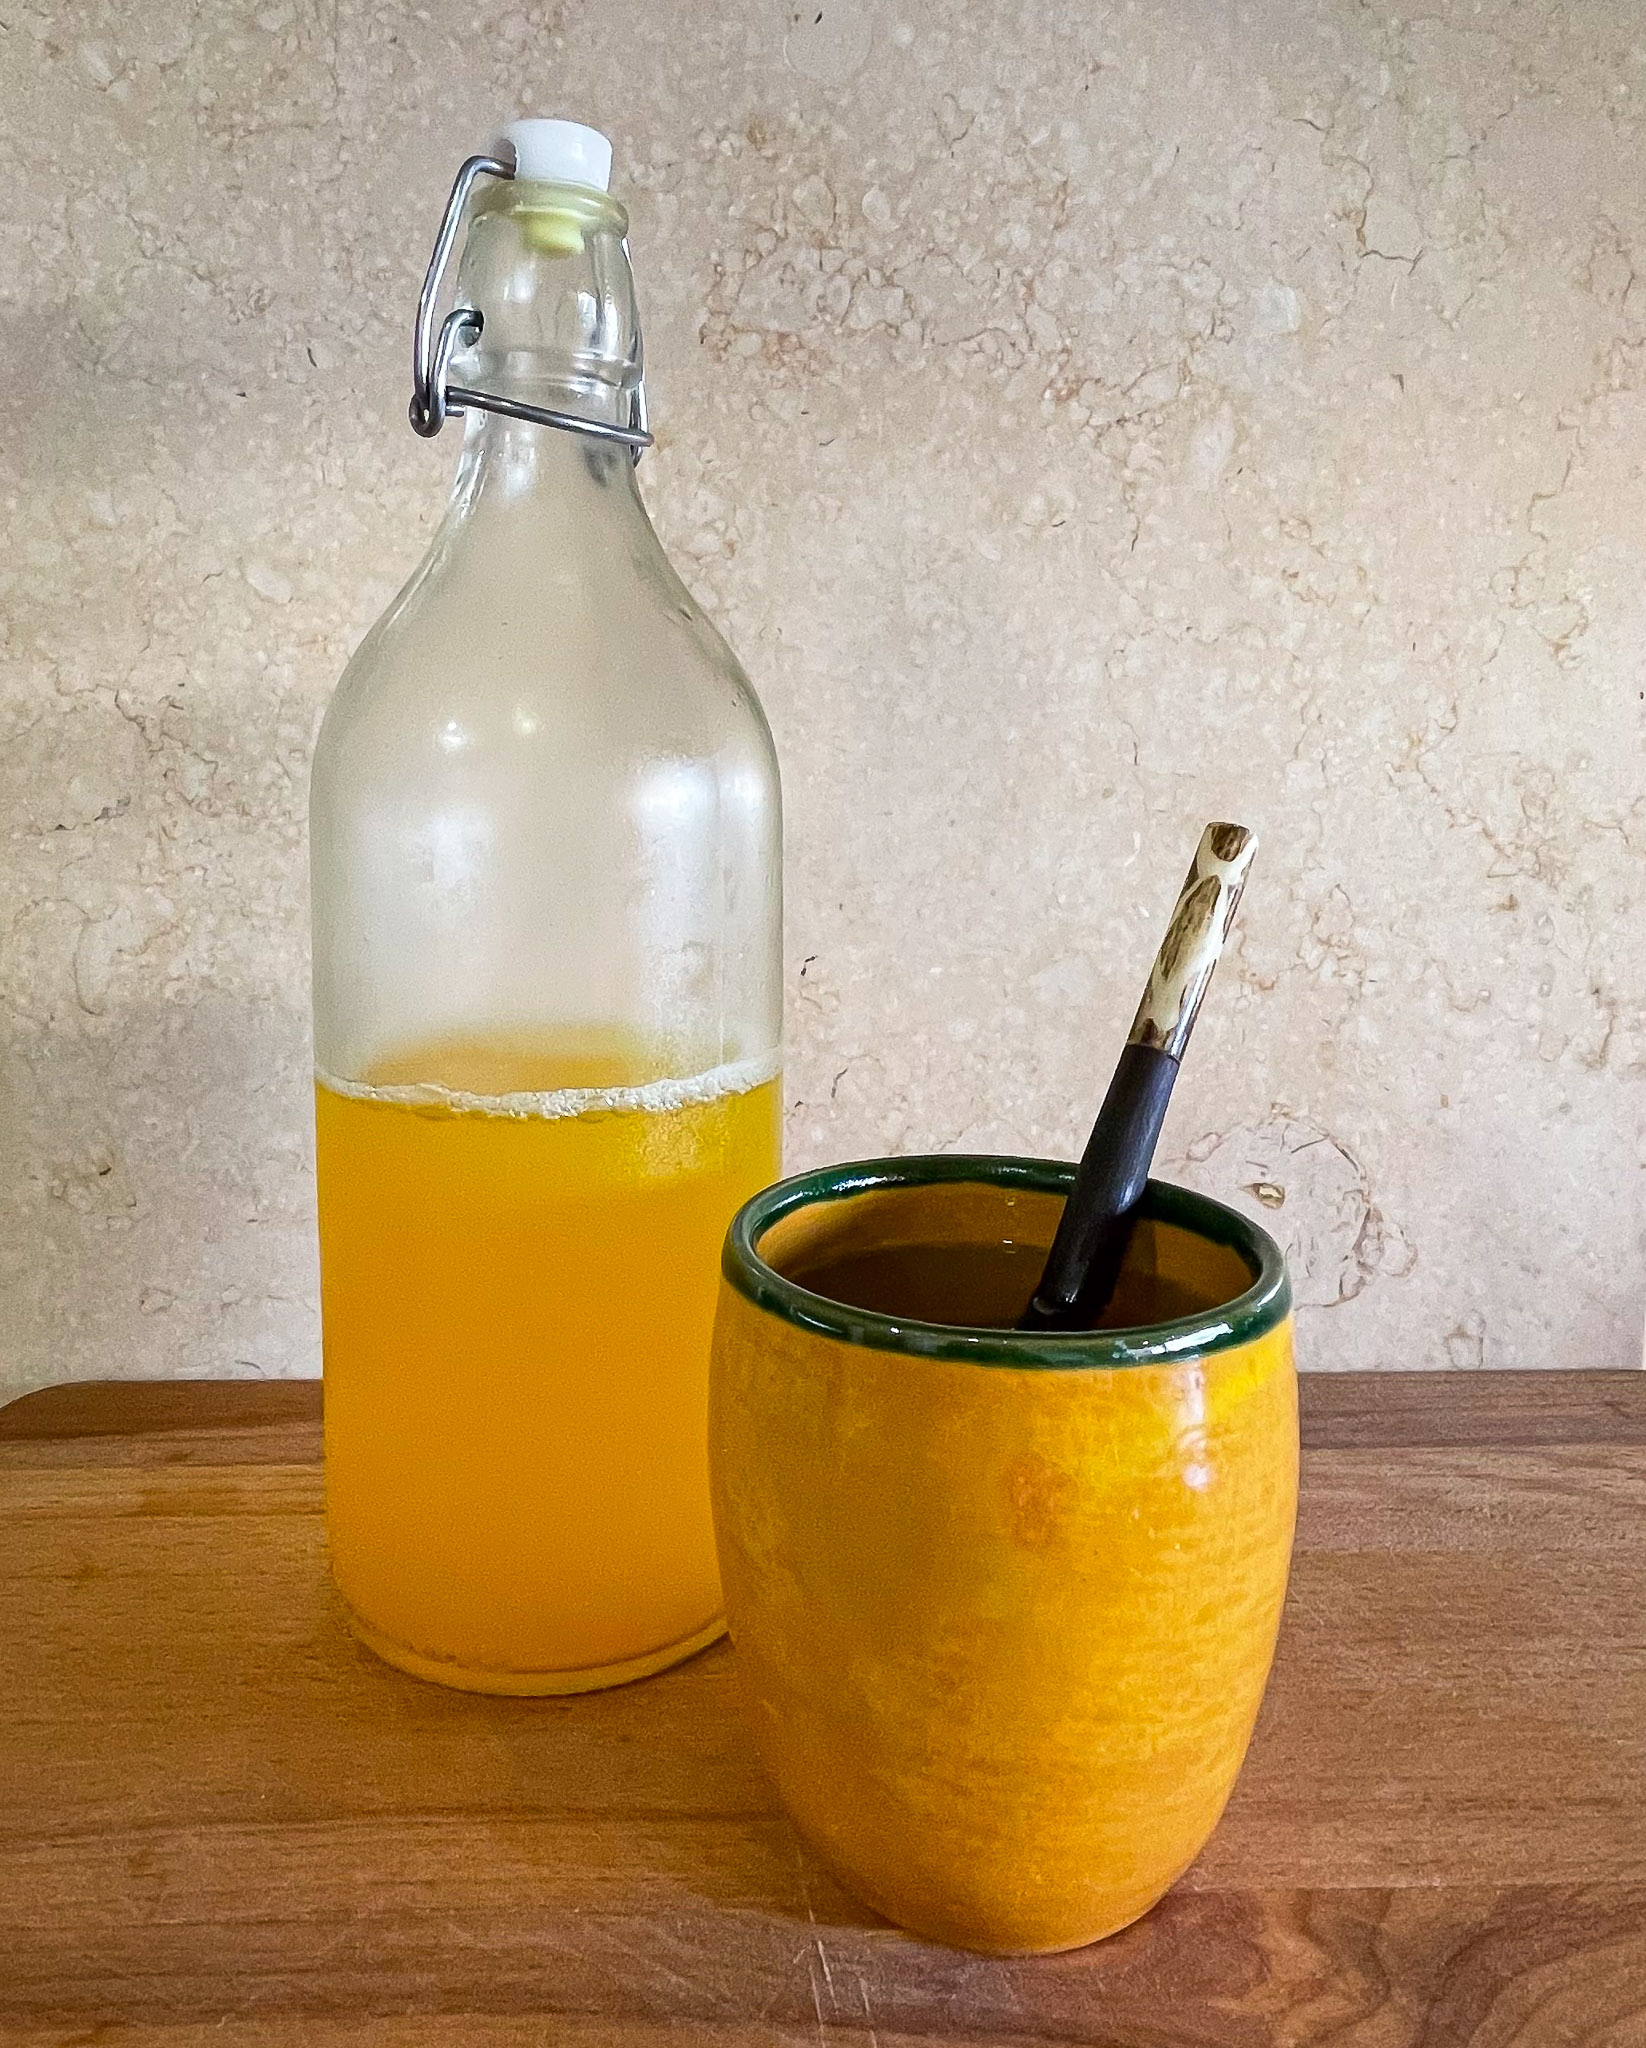 alt="a yellow ceramic mug containing a liquid set in front of a glass bottle containing the yellow winter tonic."